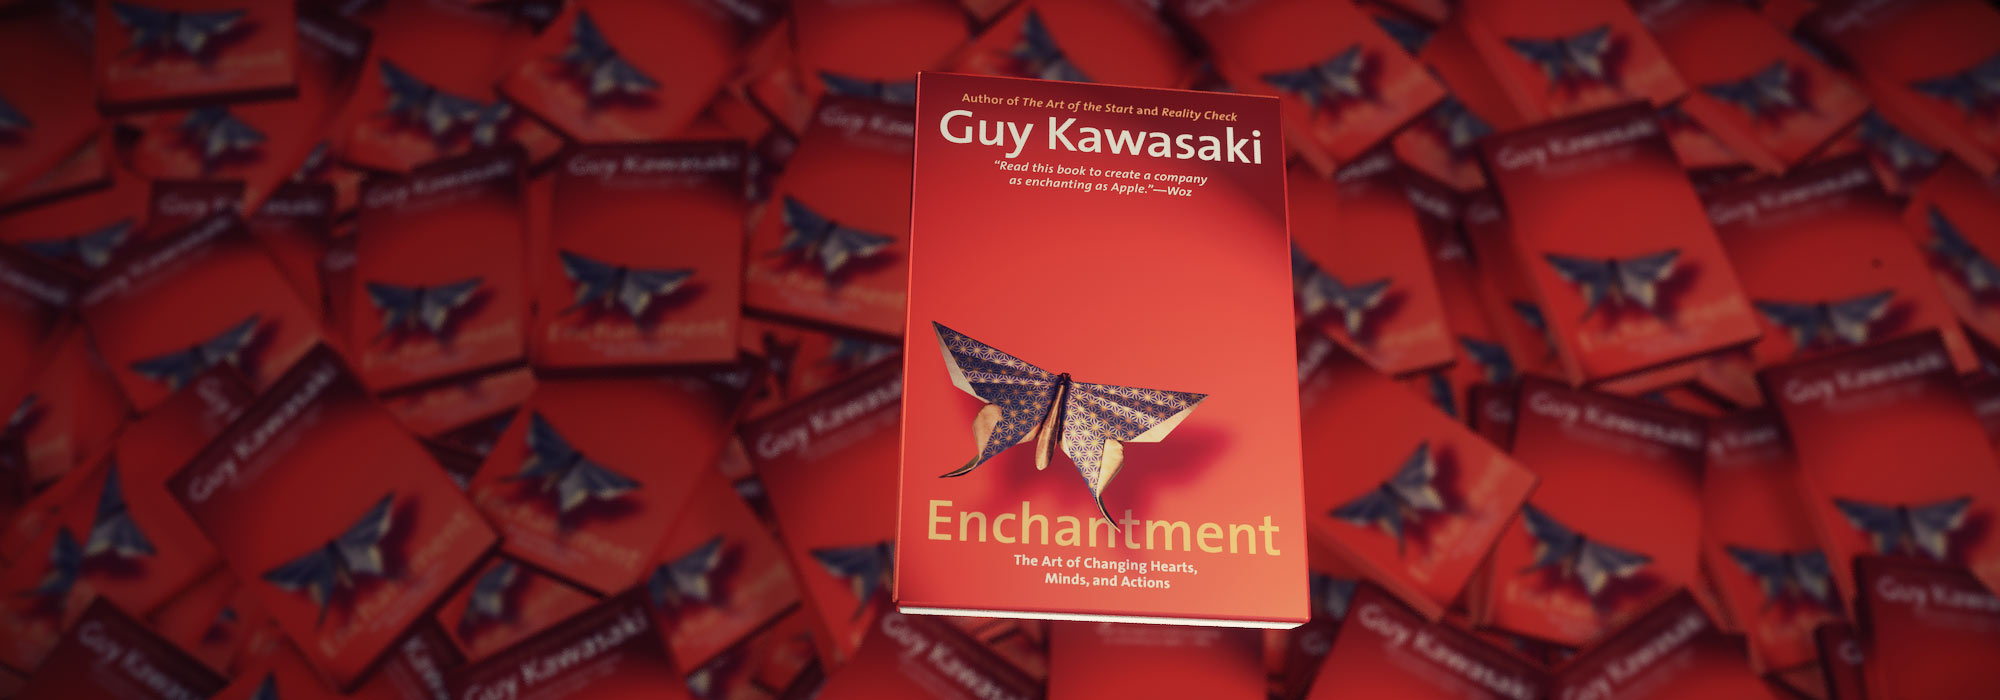 Featured image for “Review: “Enchantment” by Guy Kawasaki”